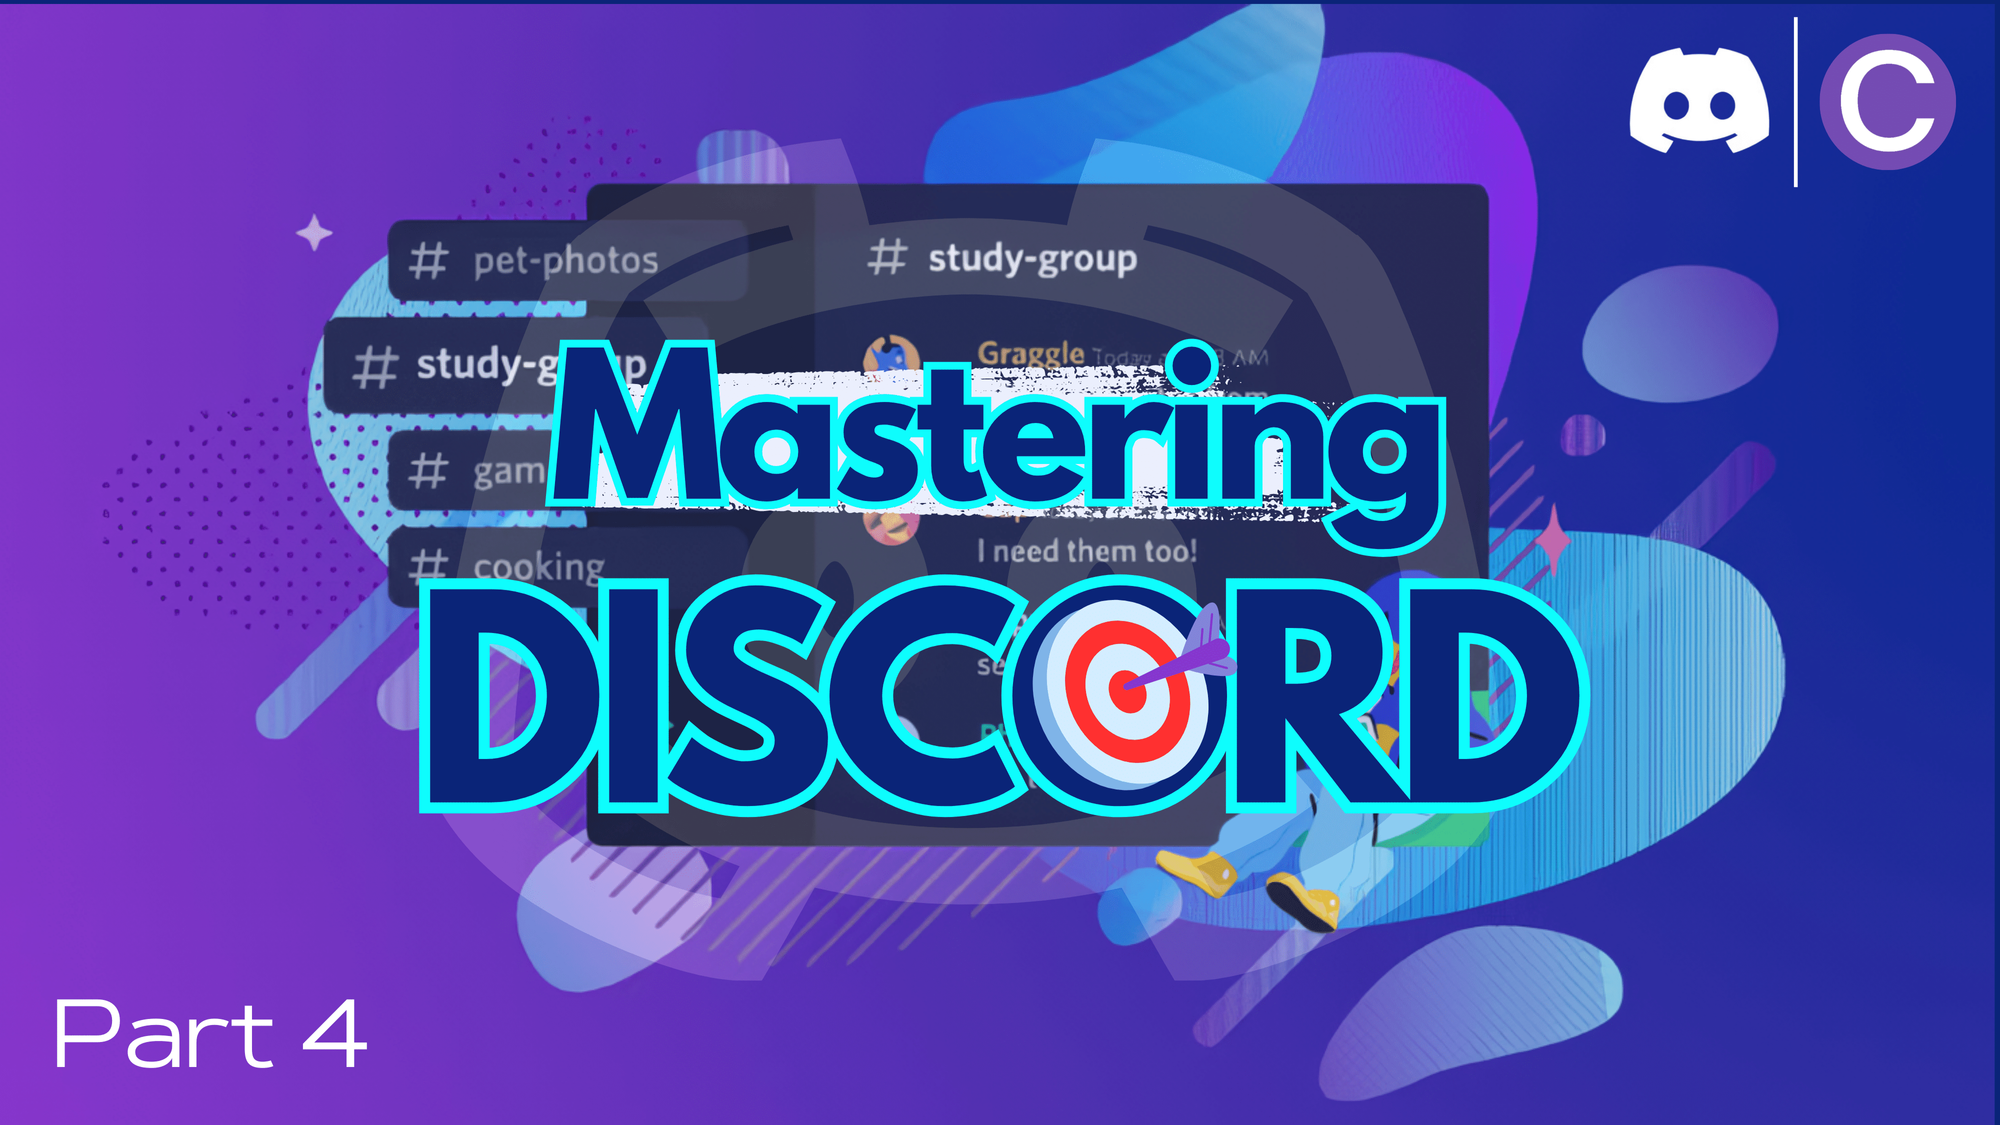 How to build a real Discord community [Step by Step Guide]